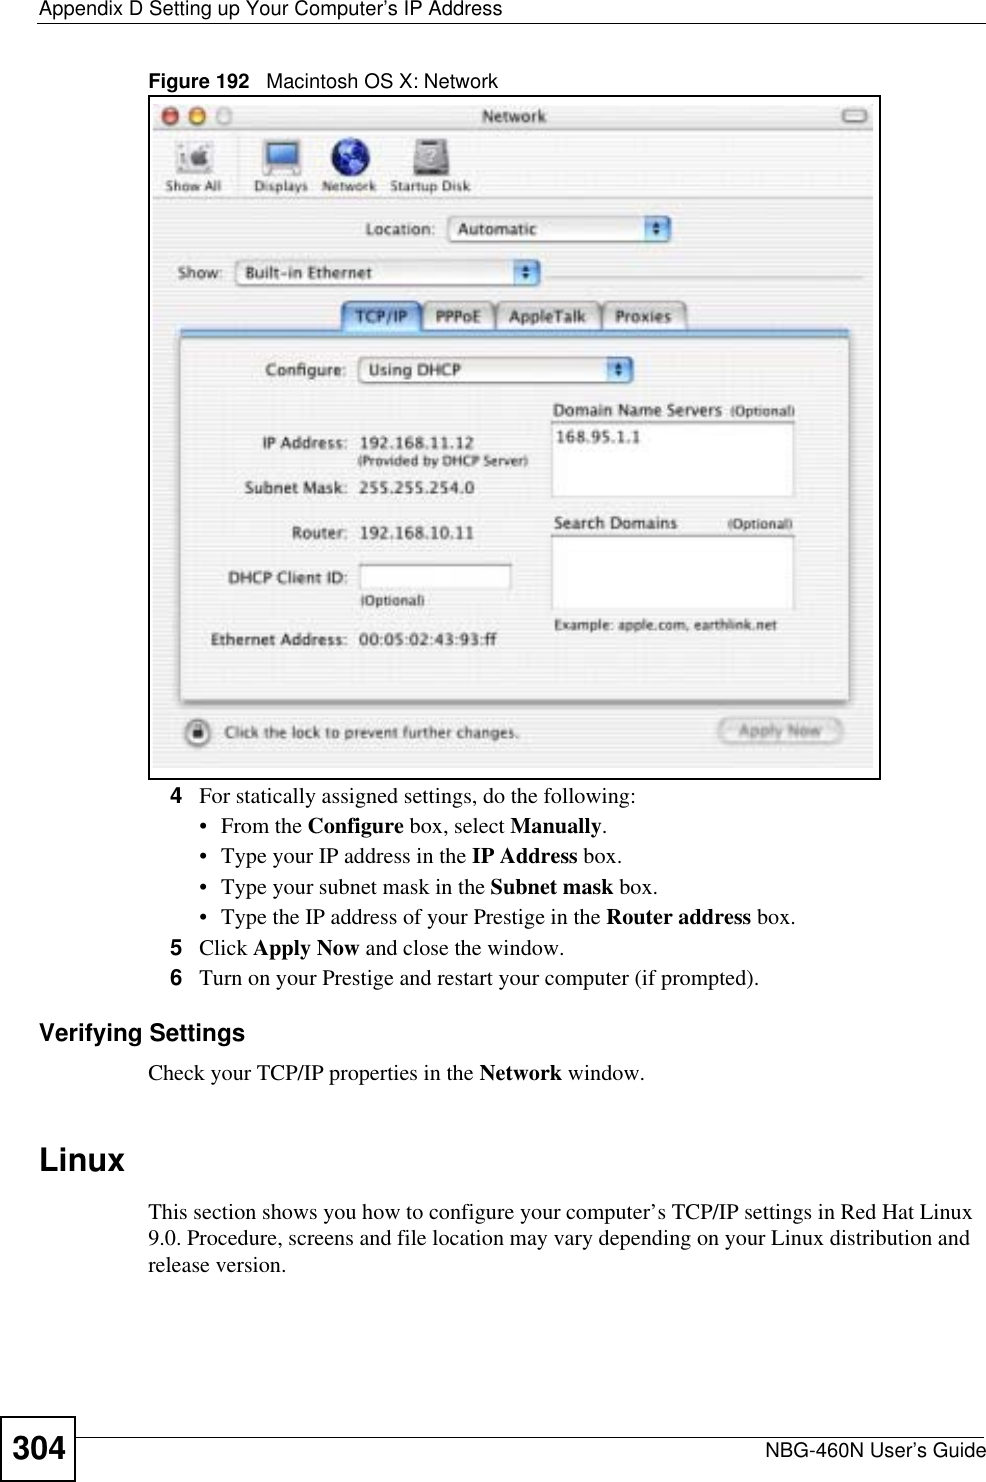 Appendix D Setting up Your Computer’s IP AddressNBG-460N User’s Guide304Figure 192   Macintosh OS X: Network4For statically assigned settings, do the following:•From the Configure box, select Manually.• Type your IP address in the IP Address box.• Type your subnet mask in the Subnet mask box.• Type the IP address of your Prestige in the Router address box.5Click Apply Now and close the window.6Turn on your Prestige and restart your computer (if prompted).Verifying SettingsCheck your TCP/IP properties in the Network window.LinuxThis section shows you how to configure your computer’s TCP/IP settings in Red Hat Linux 9.0. Procedure, screens and file location may vary depending on your Linux distribution and release version. 